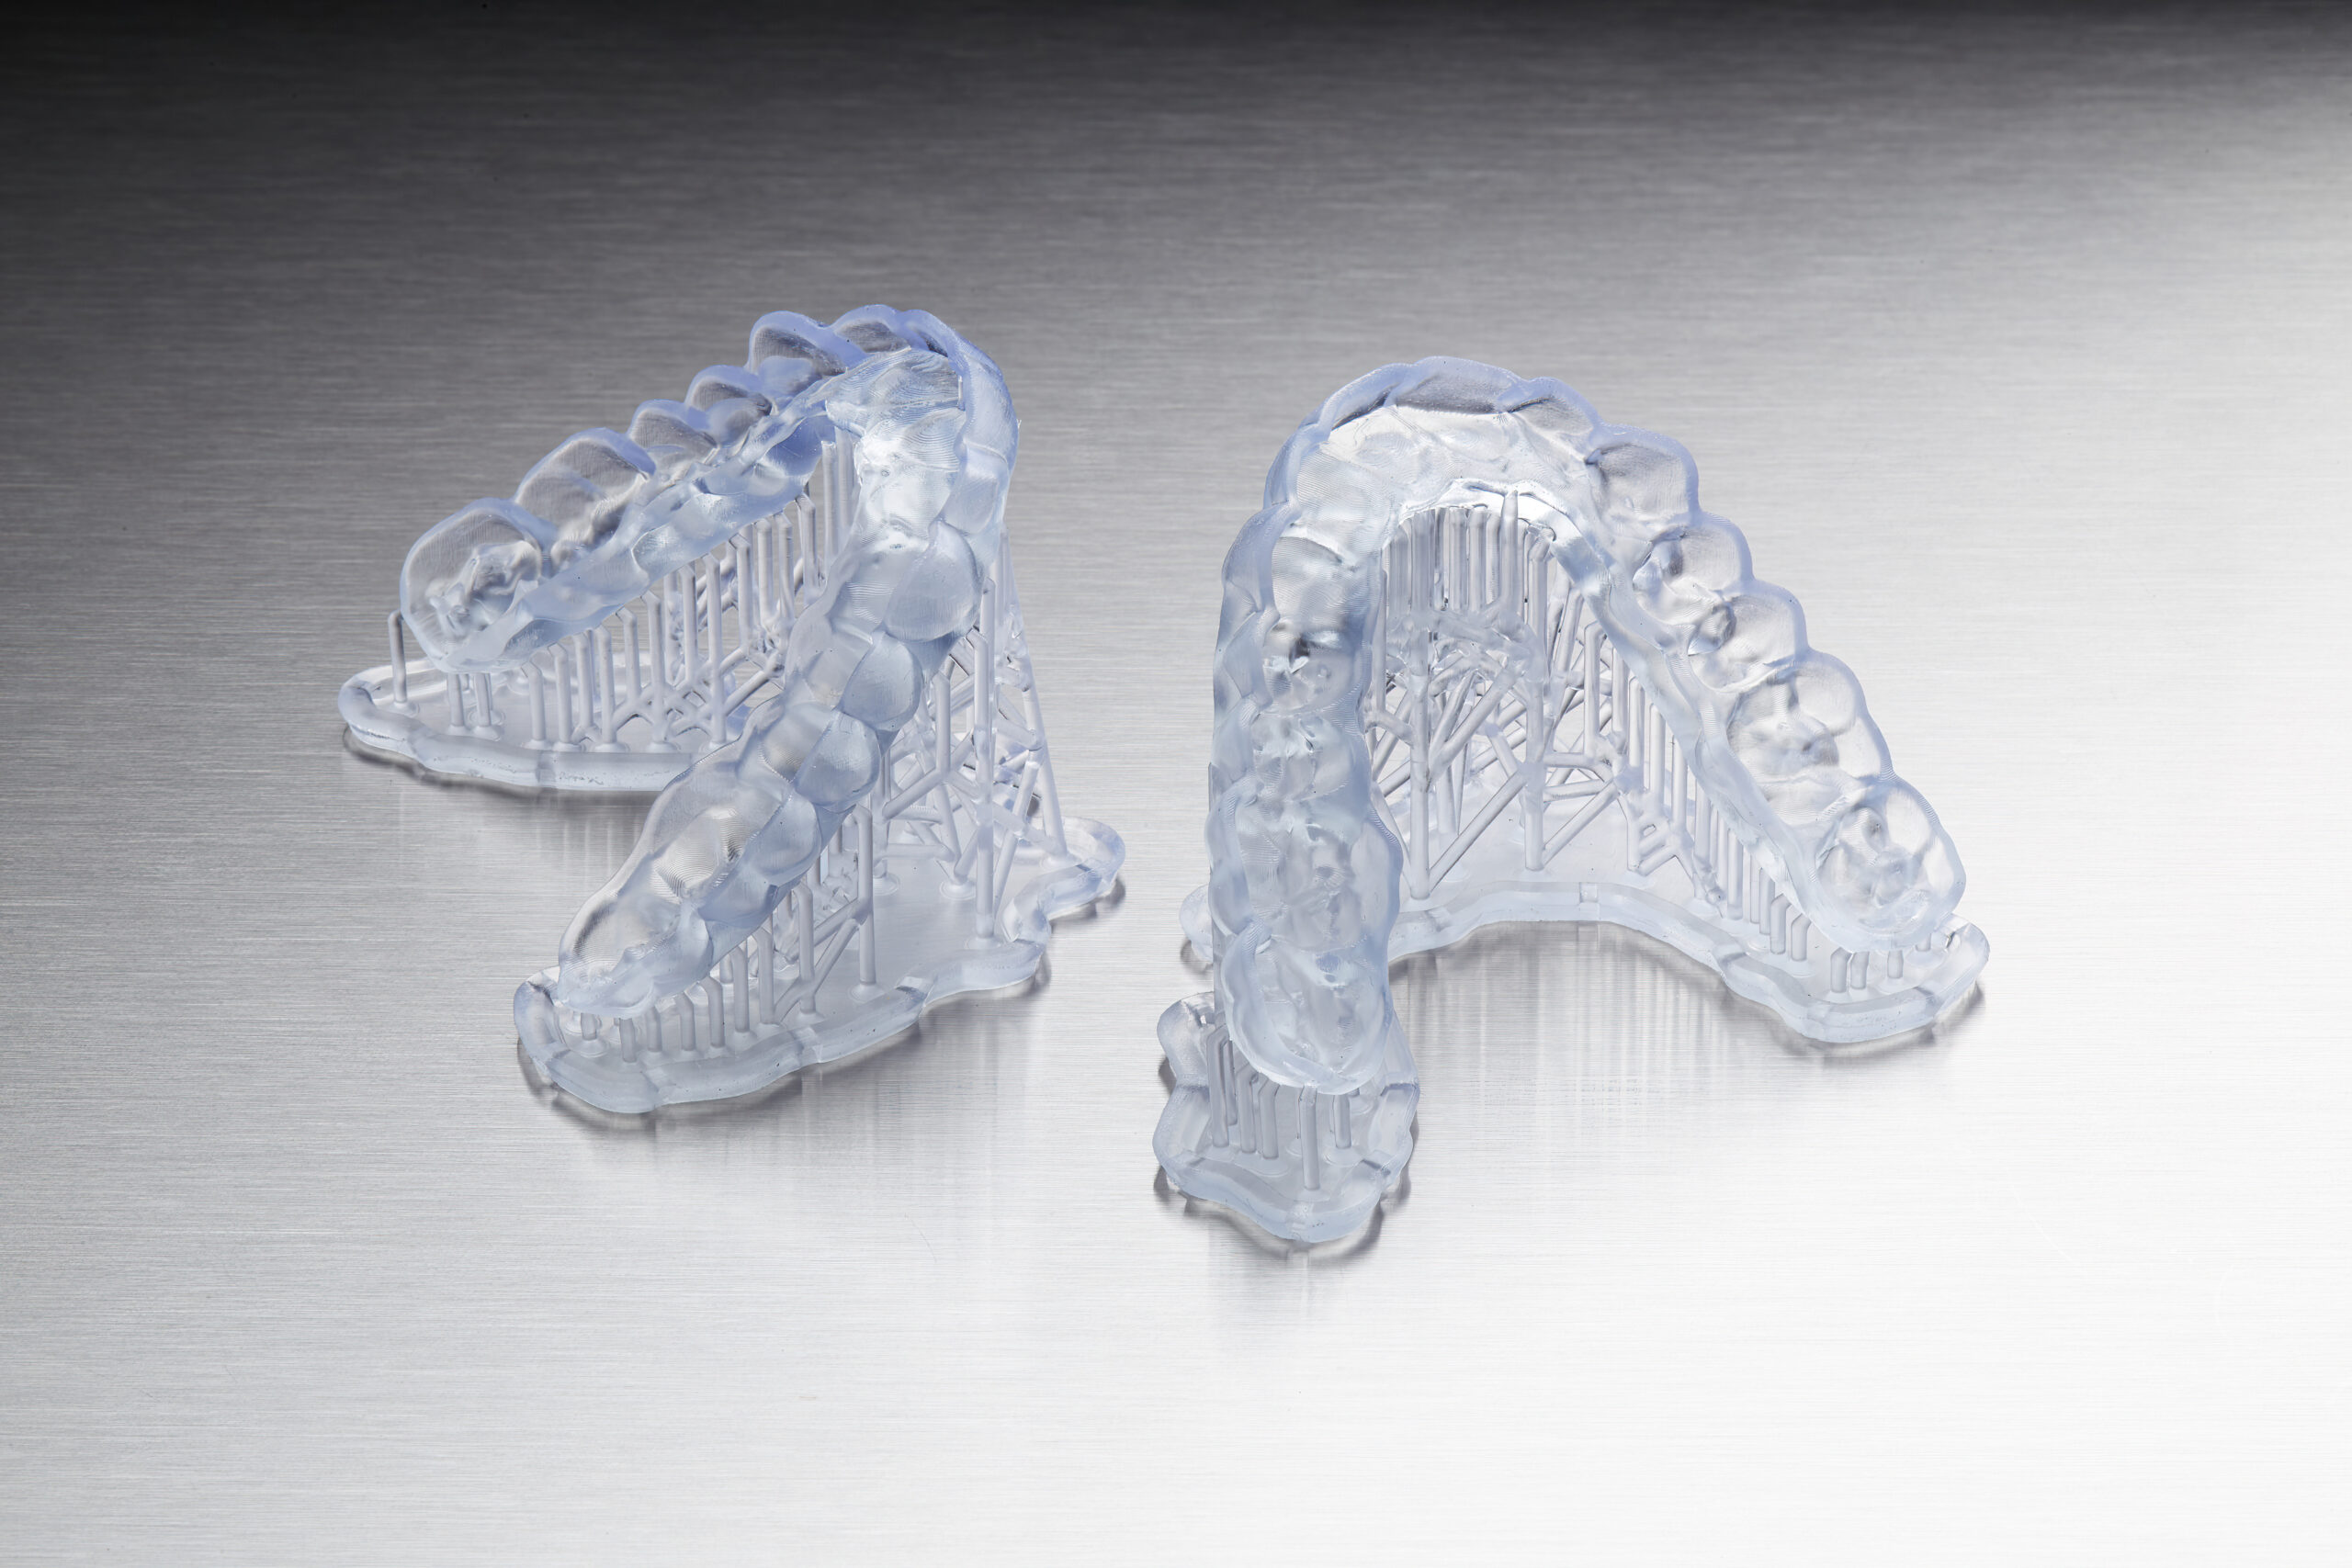 CREAT3D news: Formlabs announce new Flexible & BioMed resins